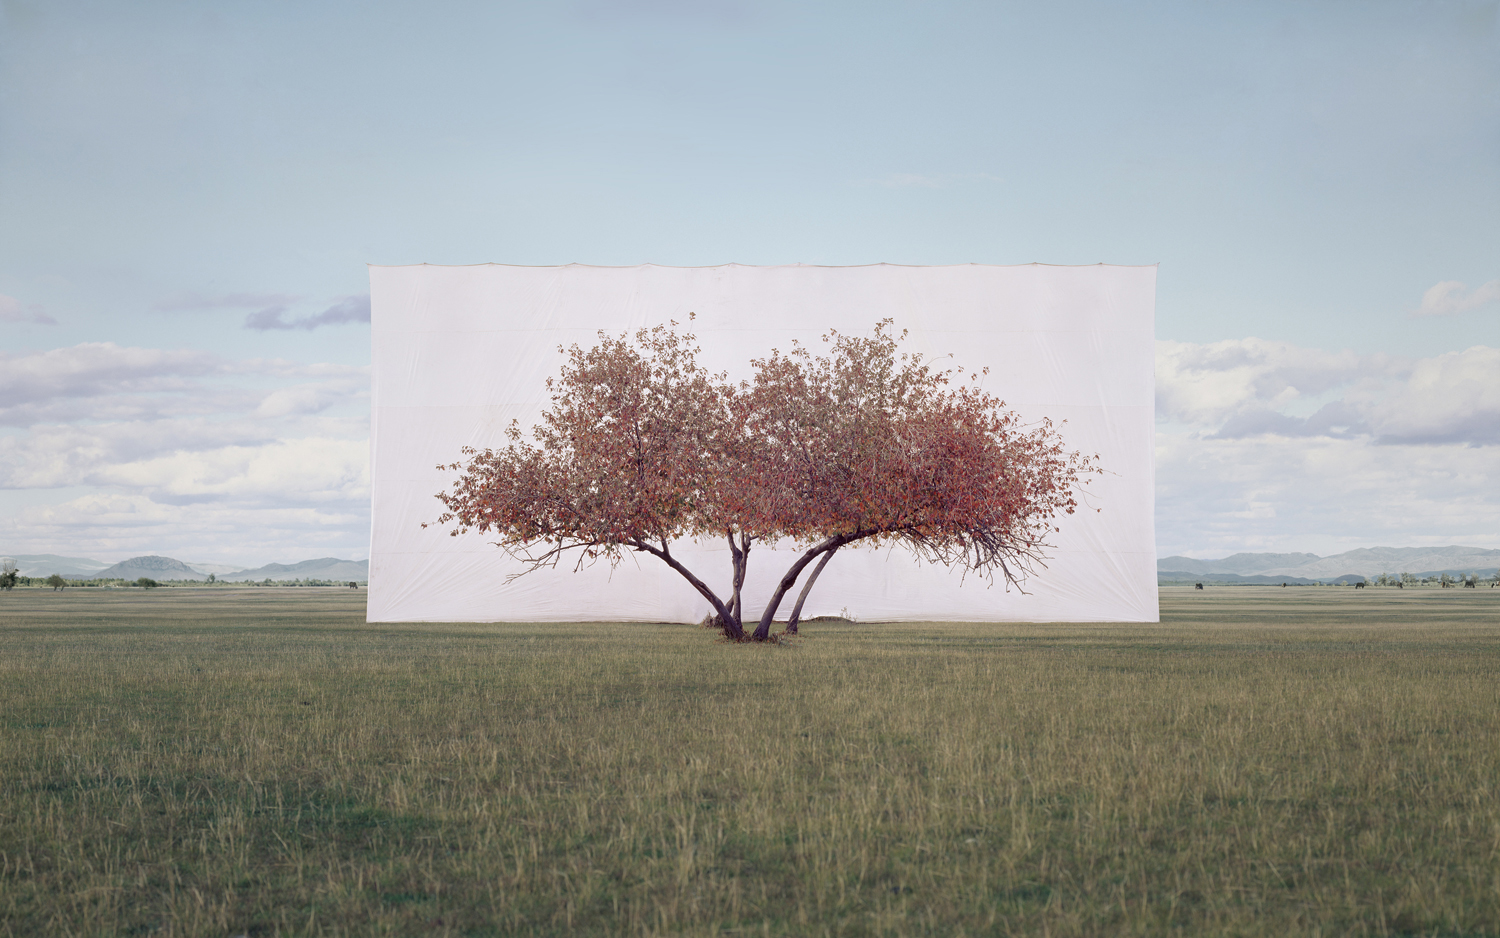 Platform 26, Myoung Ho Lee, Tree...#2 - The Trustees of Reservations